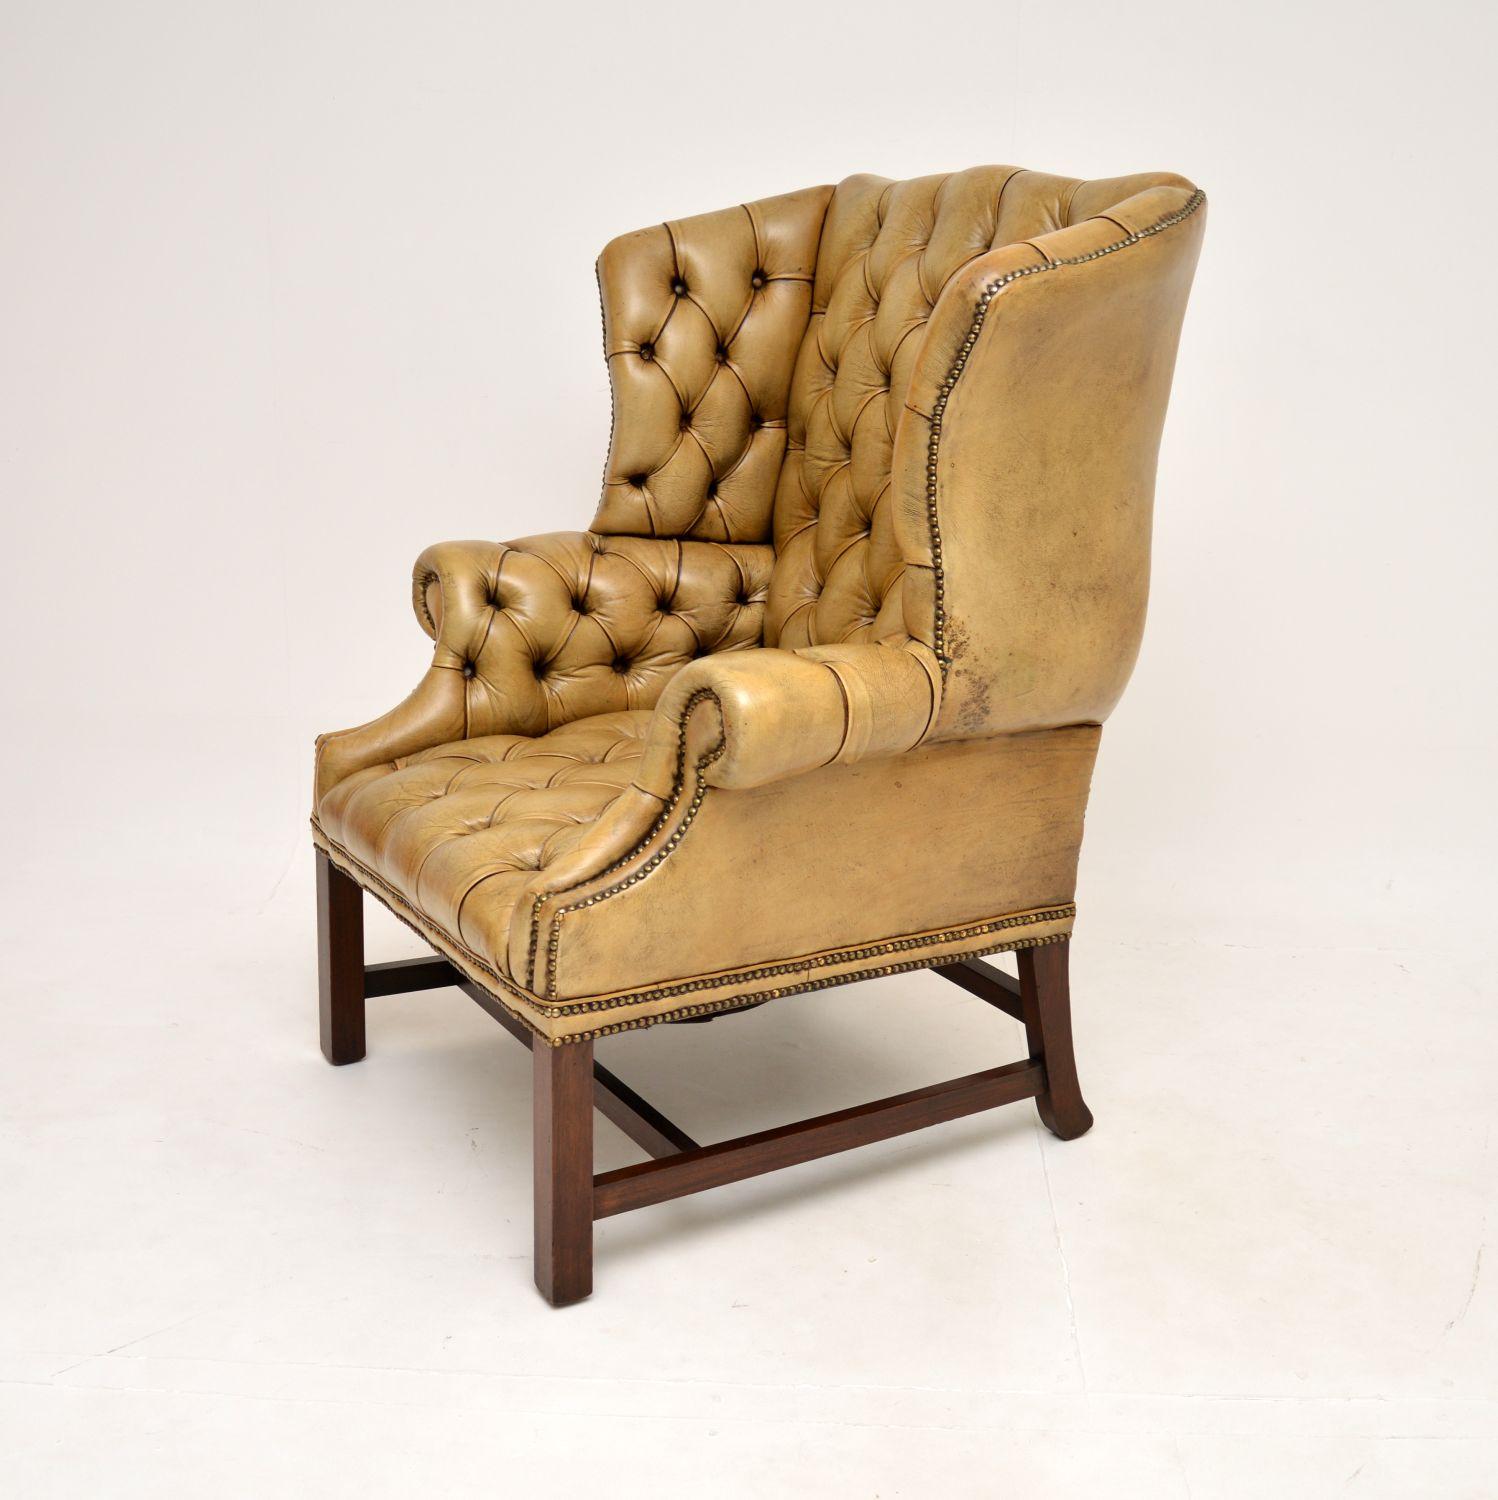 British Antique Deep Buttoned Leather Wing Back Armchair